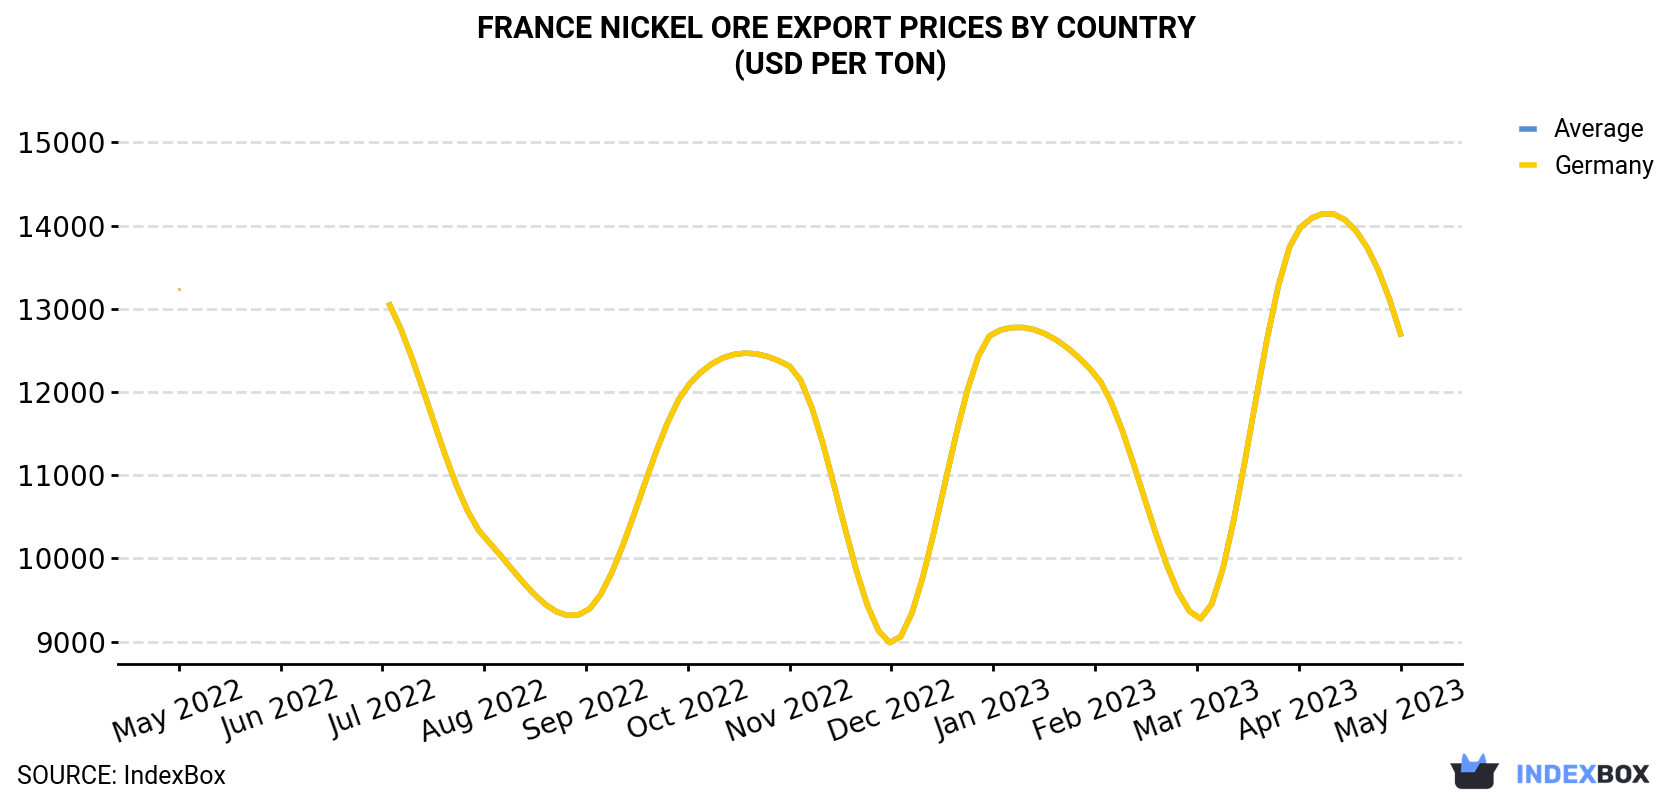 France Nickel Ore Export Prices By Country (USD Per Ton)